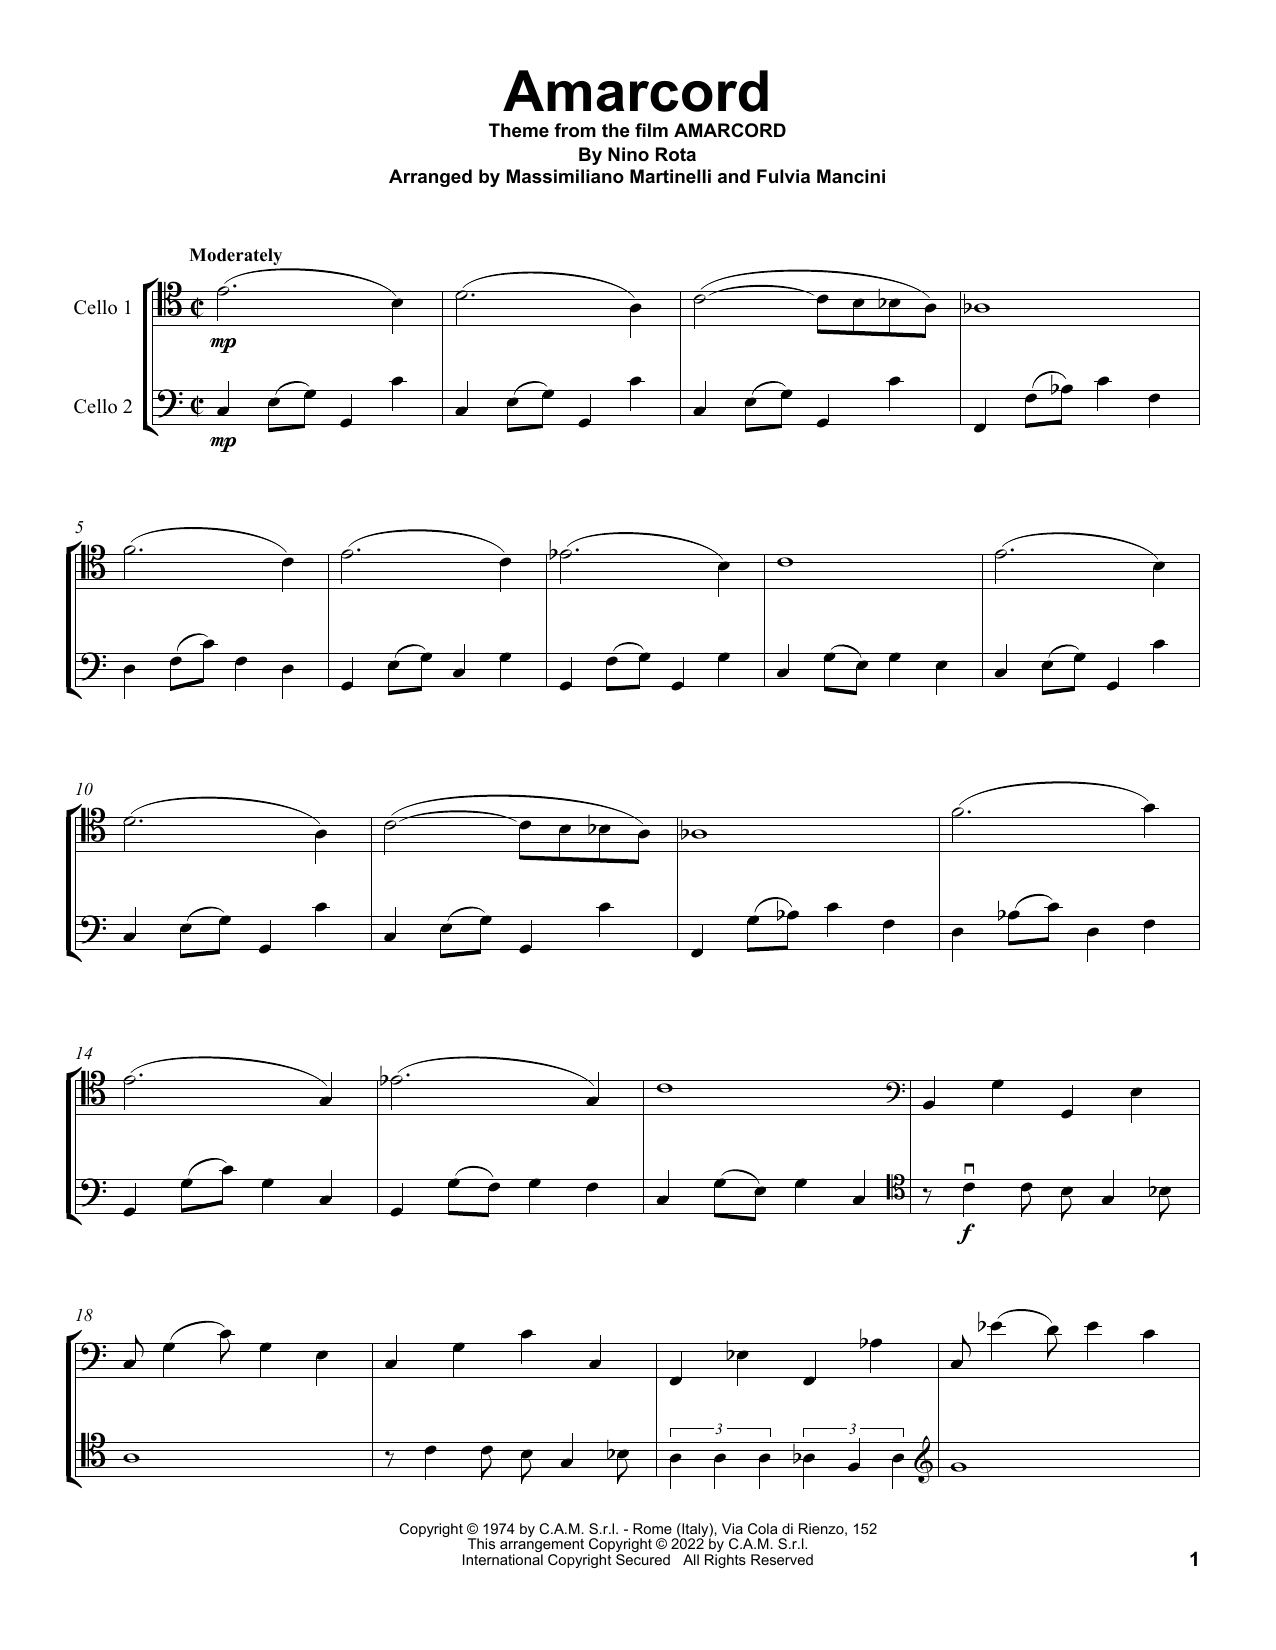 Download Mr & Mrs Cello Amarcord (from Amarcord) Sheet Music